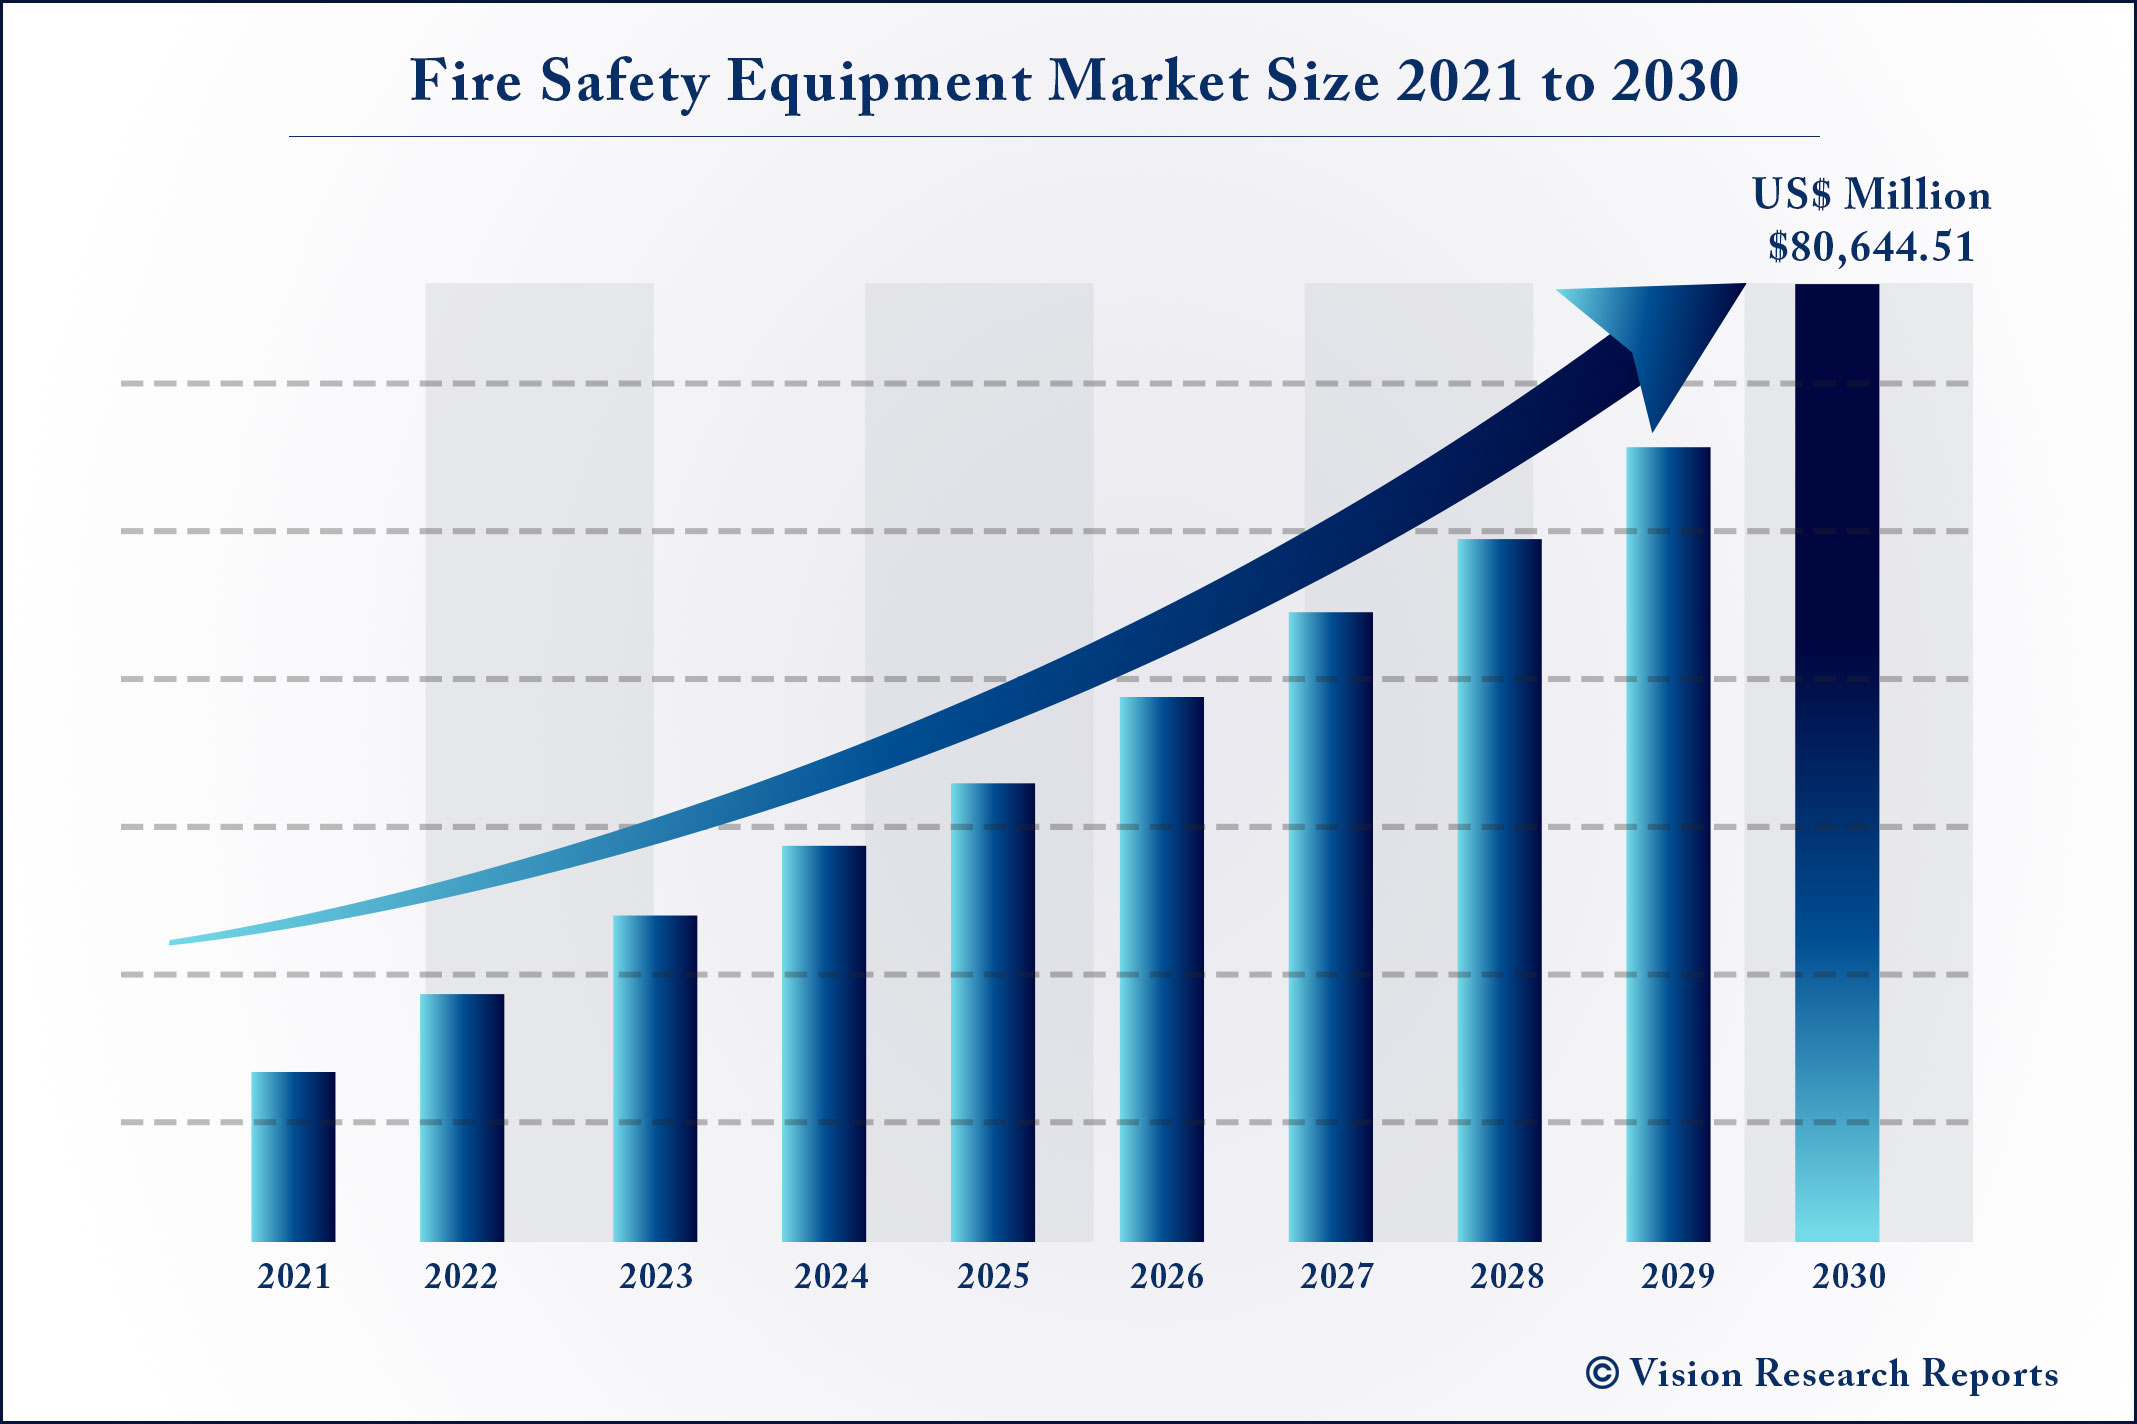 Fire Safety Equipment Market Size 2021 to 2030